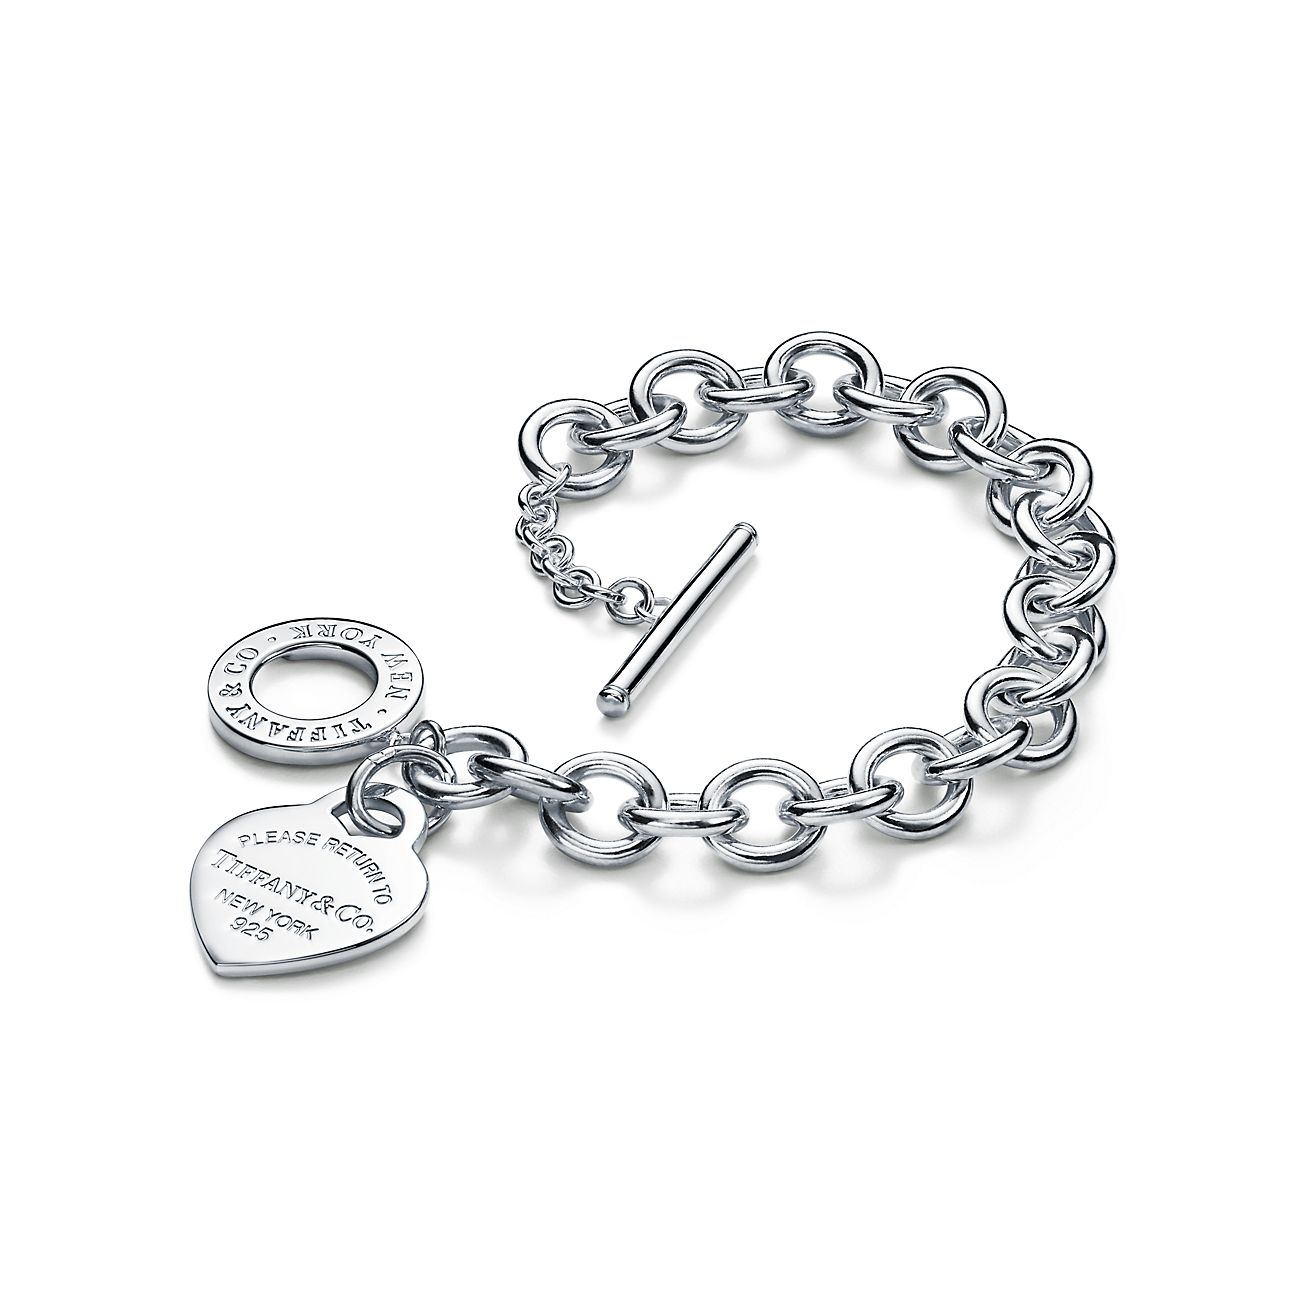 Return to Tiffany™ heart tag charm in sterling silver on a bracelet.